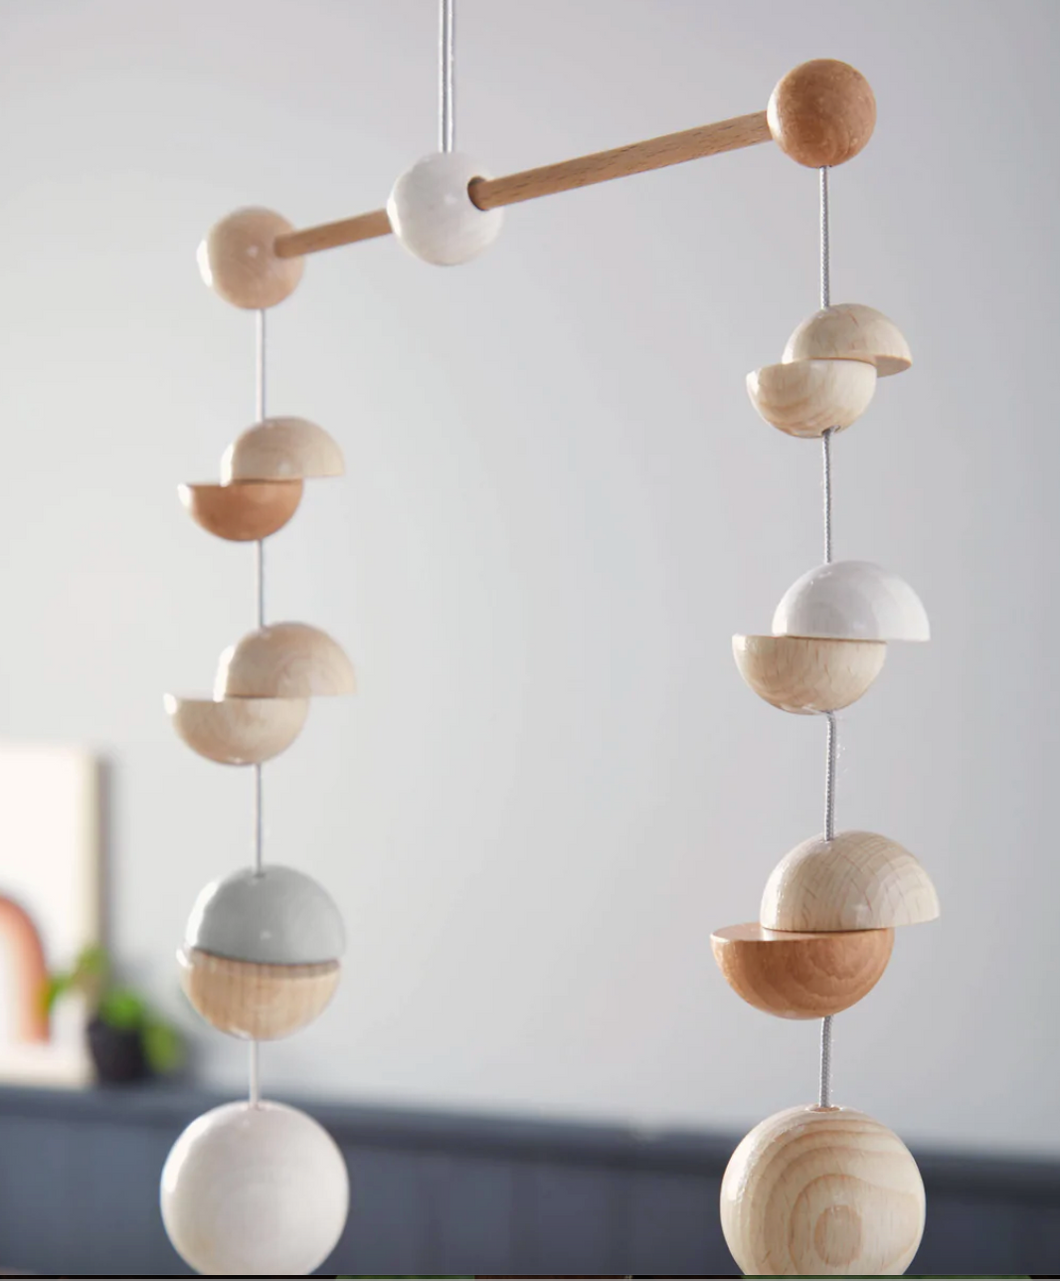 THE WOODEN MOBILE DOTS  | HABA